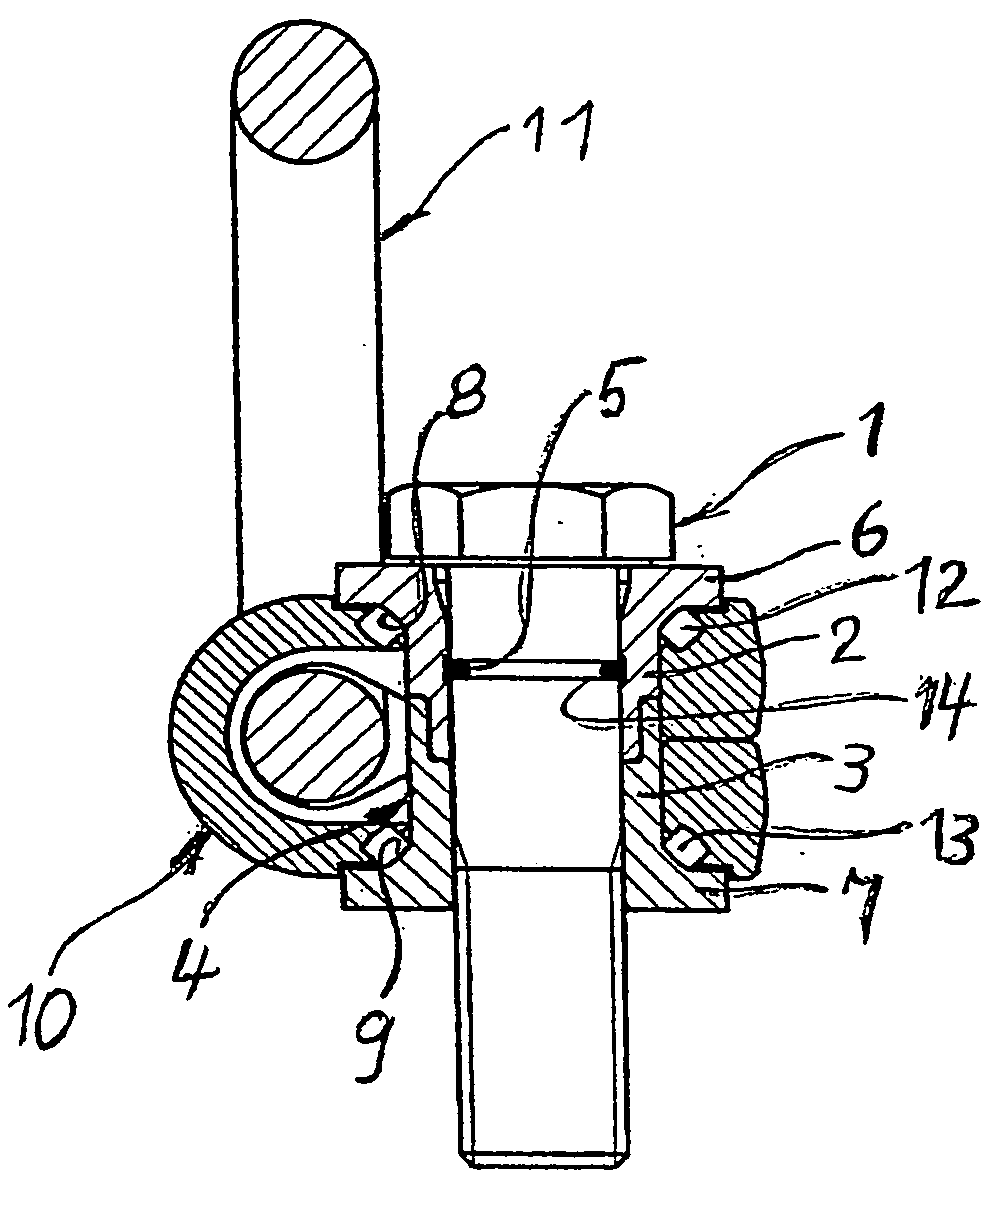 Attaching device for attaching stopping or lashing means